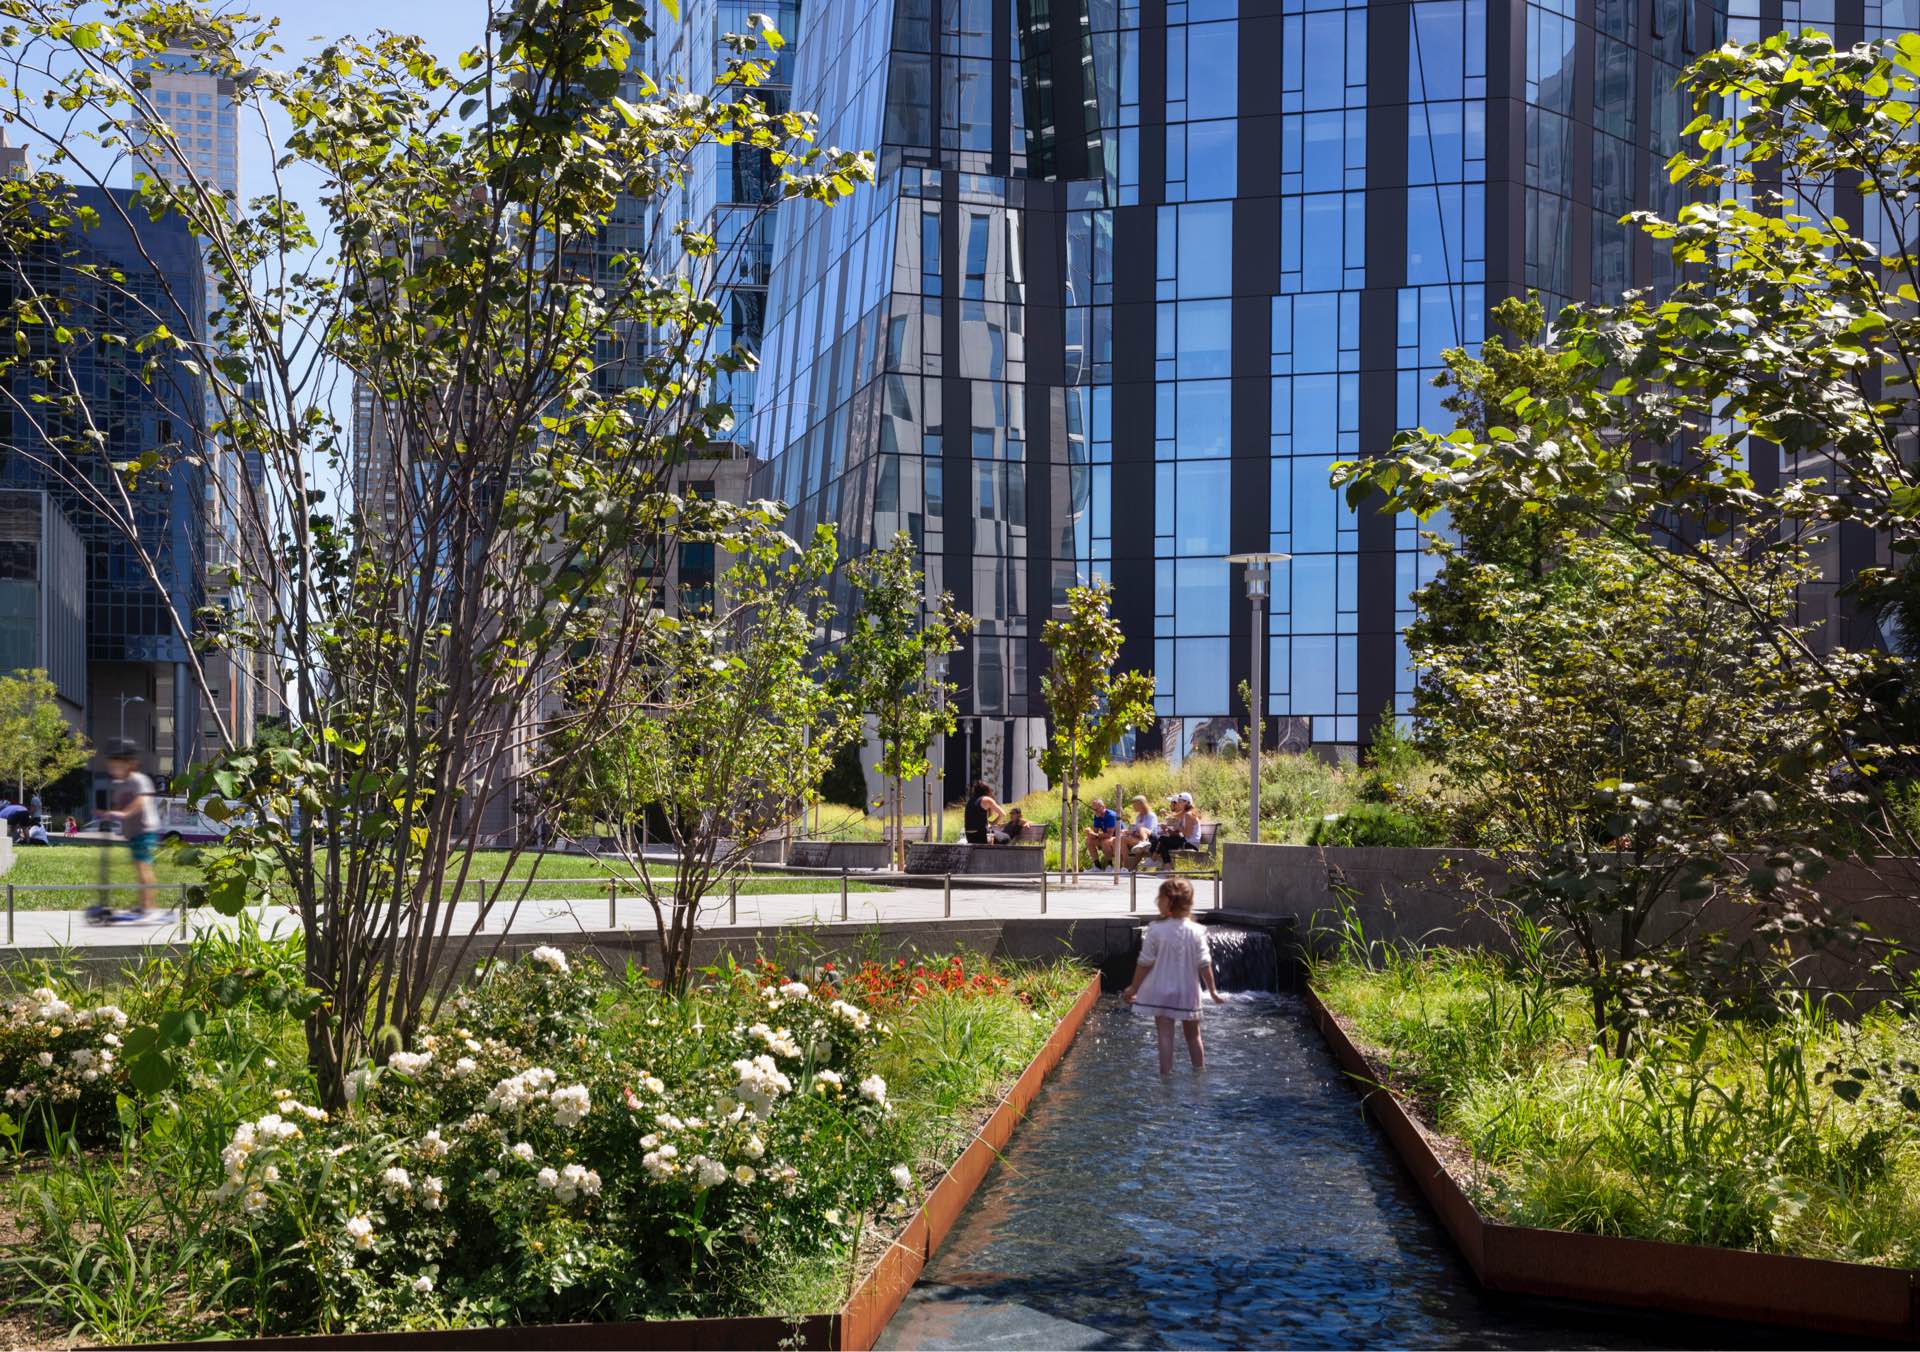 A young child walks alongside a narrow water feature in an urban park, with lush greenery and towering reflective skyscrapers in the background.